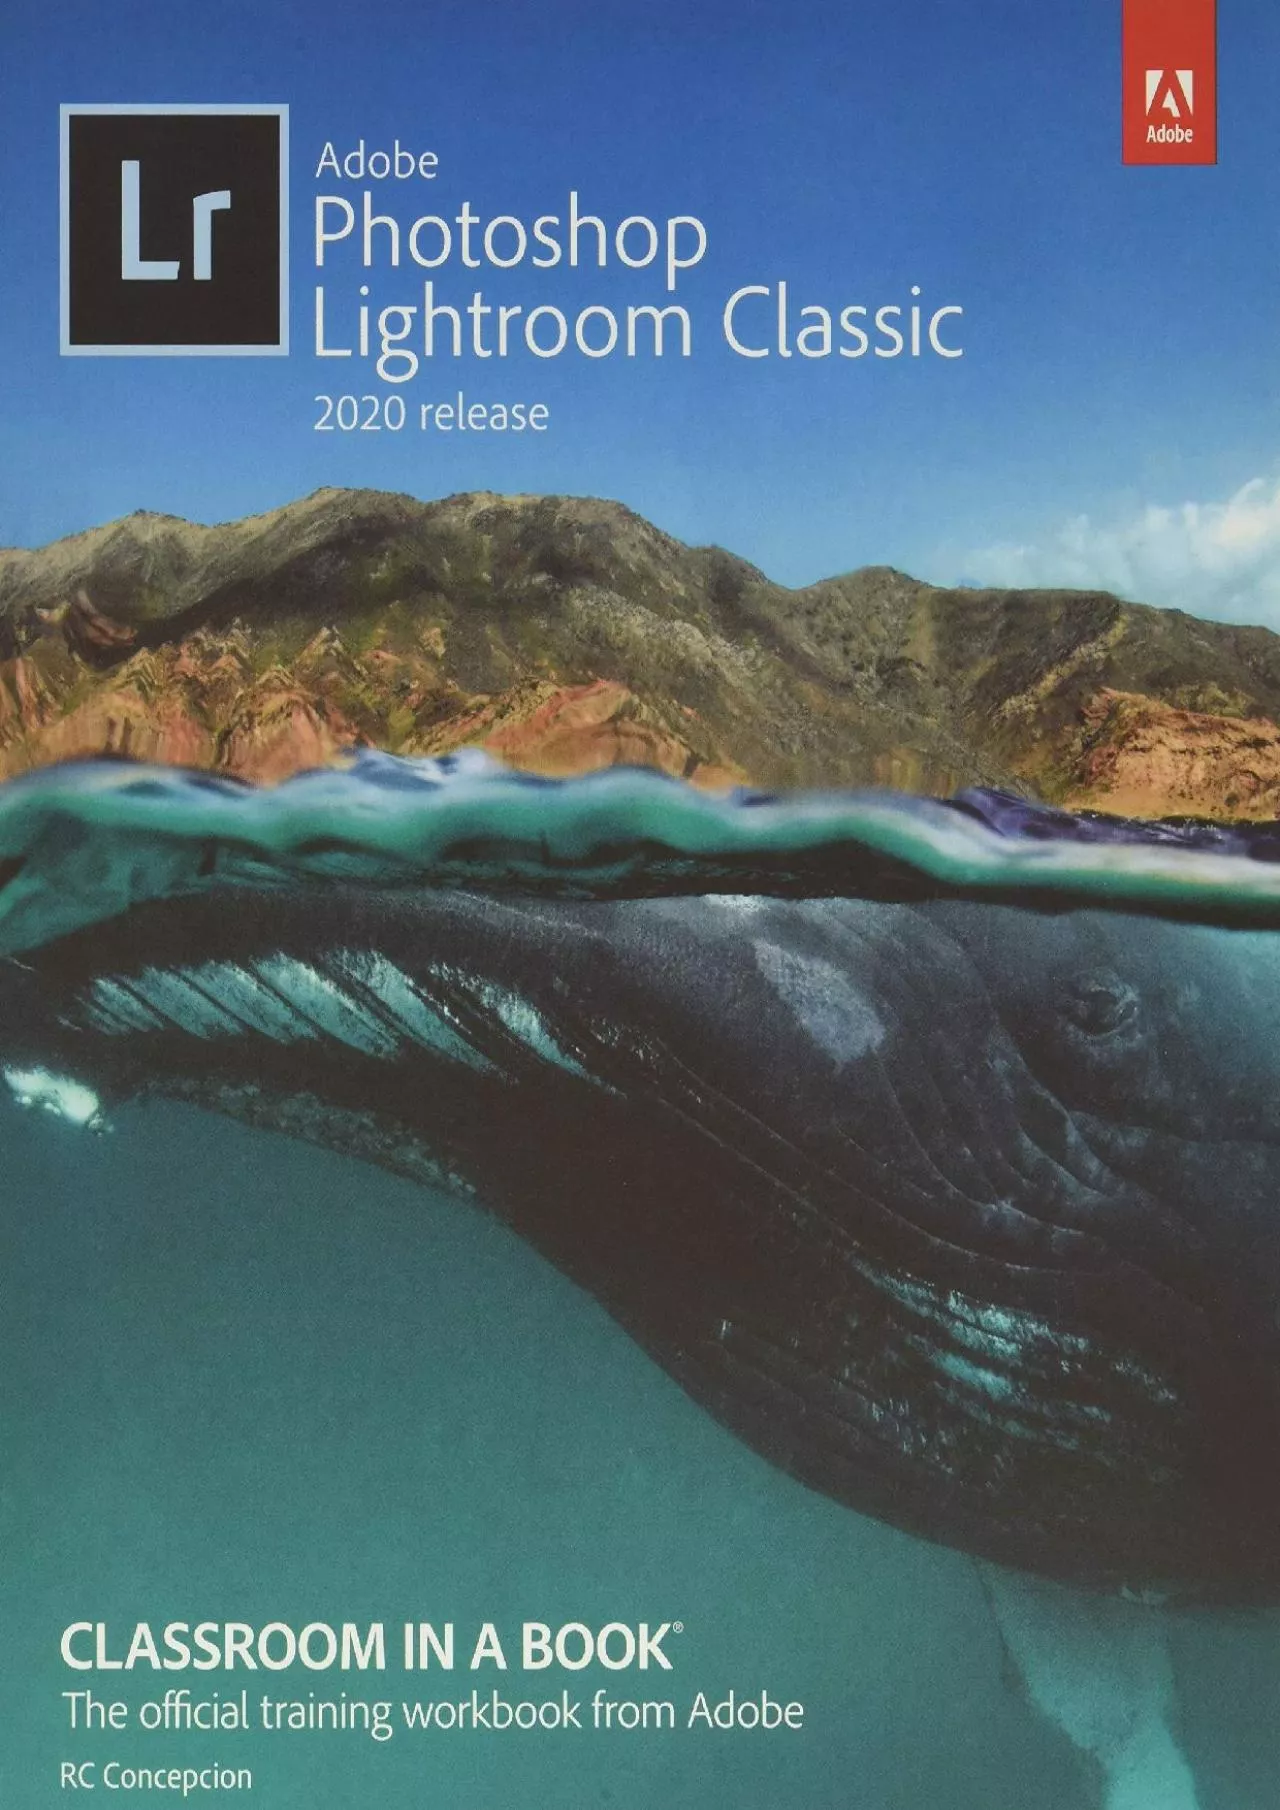 (BOOS)-Adobe Photoshop Lightroom Classic Classroom in a Book (2020 release) (Classroom